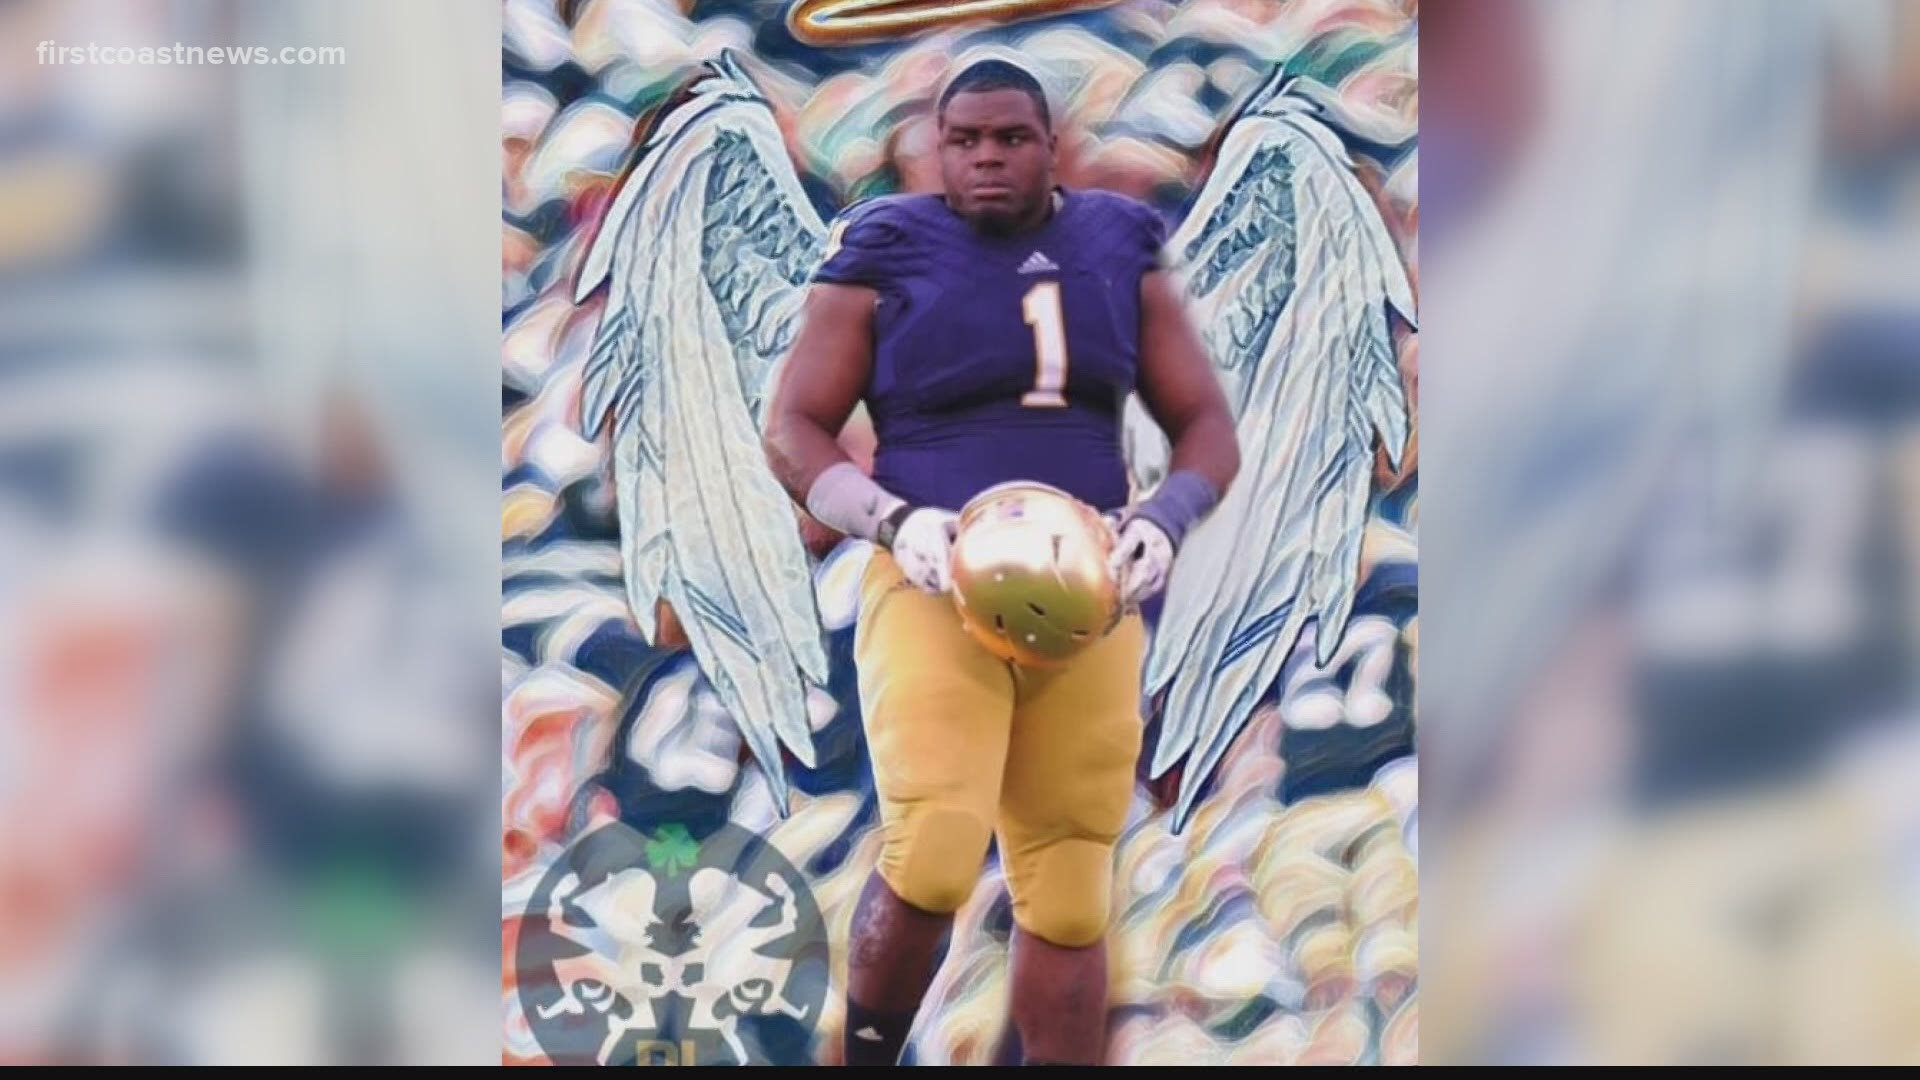 Louis Nix's mother confirmed his death to First Coast News Saturday. Friends and family say they want to keep his legacy at the top of everyone's mind.